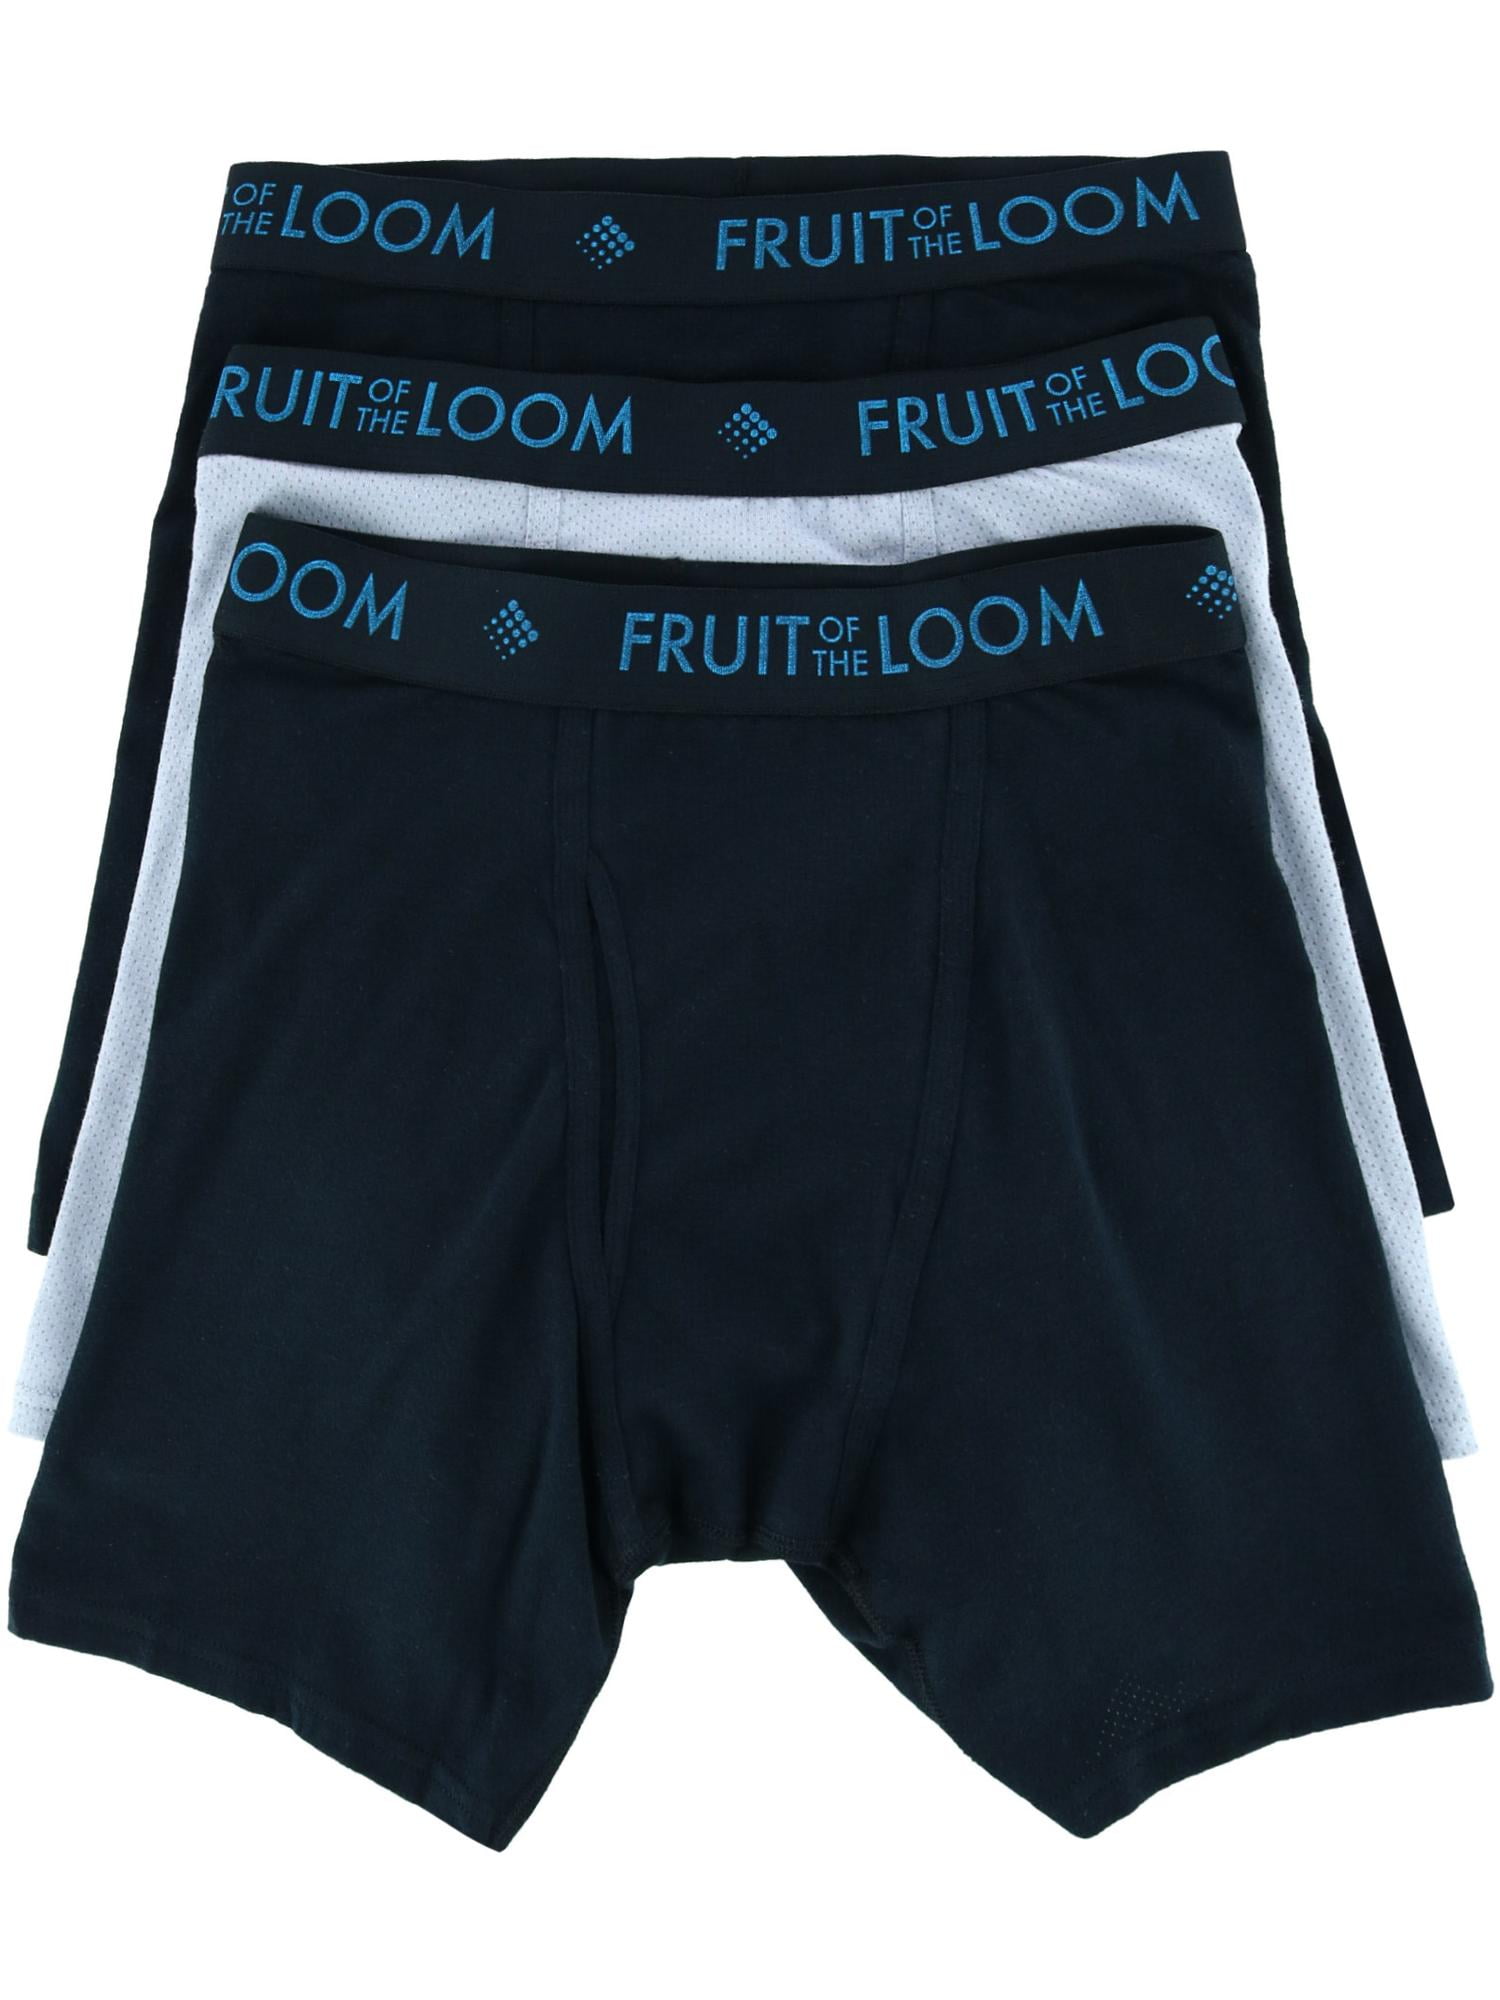 BIG MAN FRUIT OF THE LOOM 3 Boxer Briefs Breathable MicroMesh